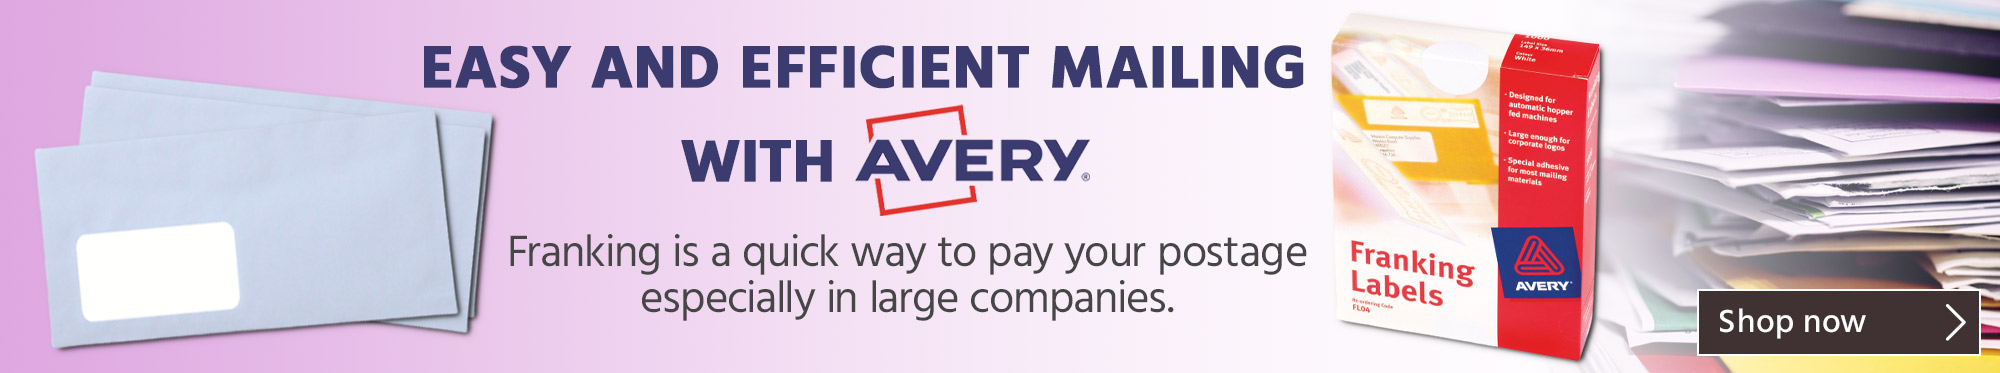 Easy and Efficient Mailing with Avery